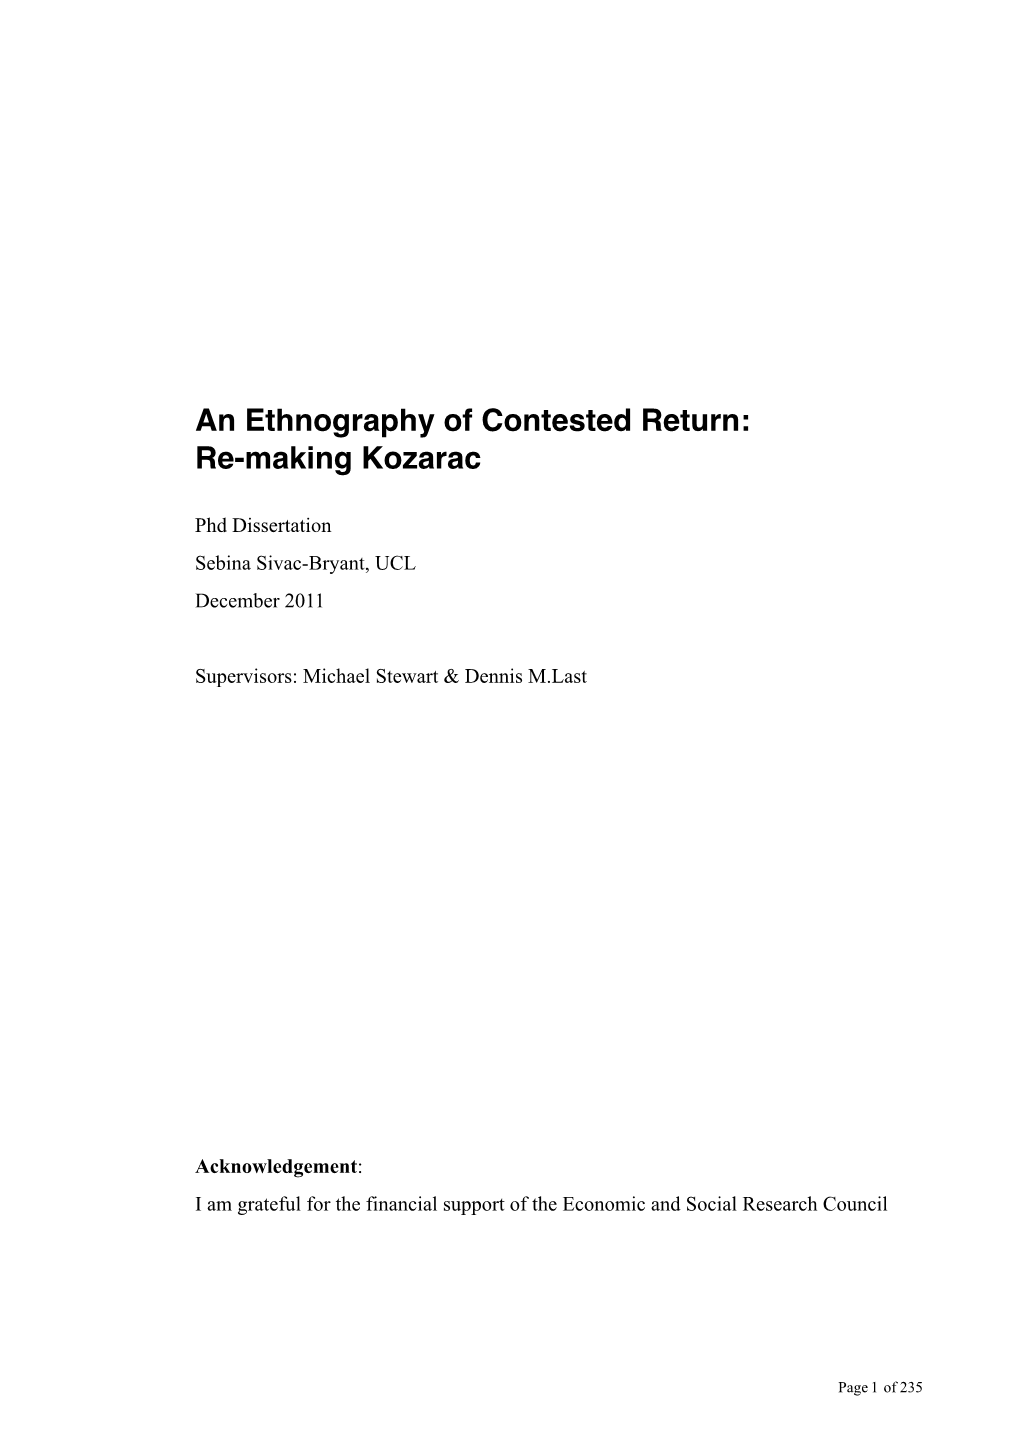 An Ethnography of Contested Return: Re-Making Kozarac